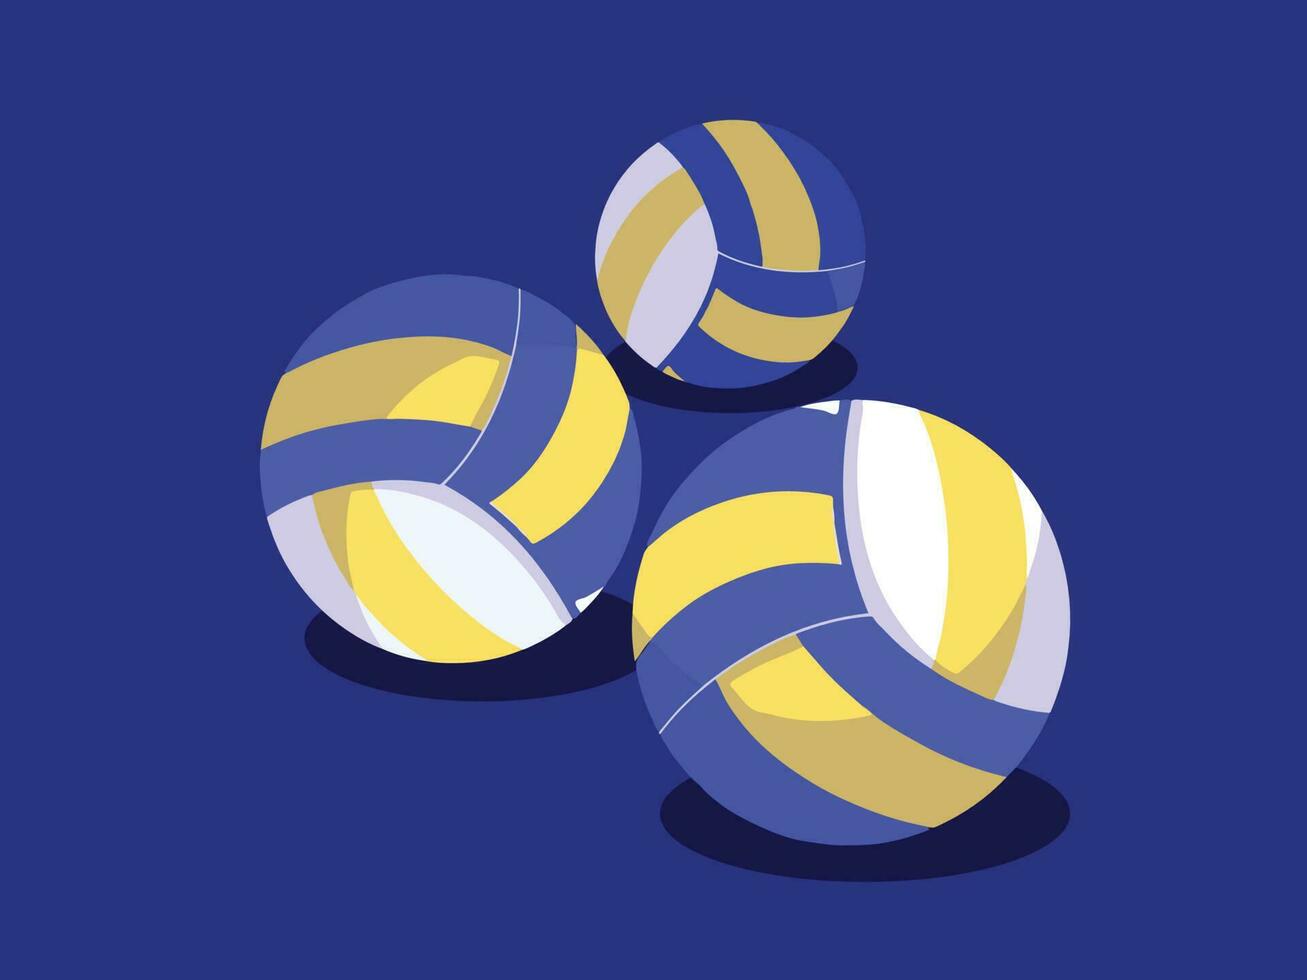 Three volley balls vector illustration isolated on dark blue horizontal background. Simple flat sports themed drawing.